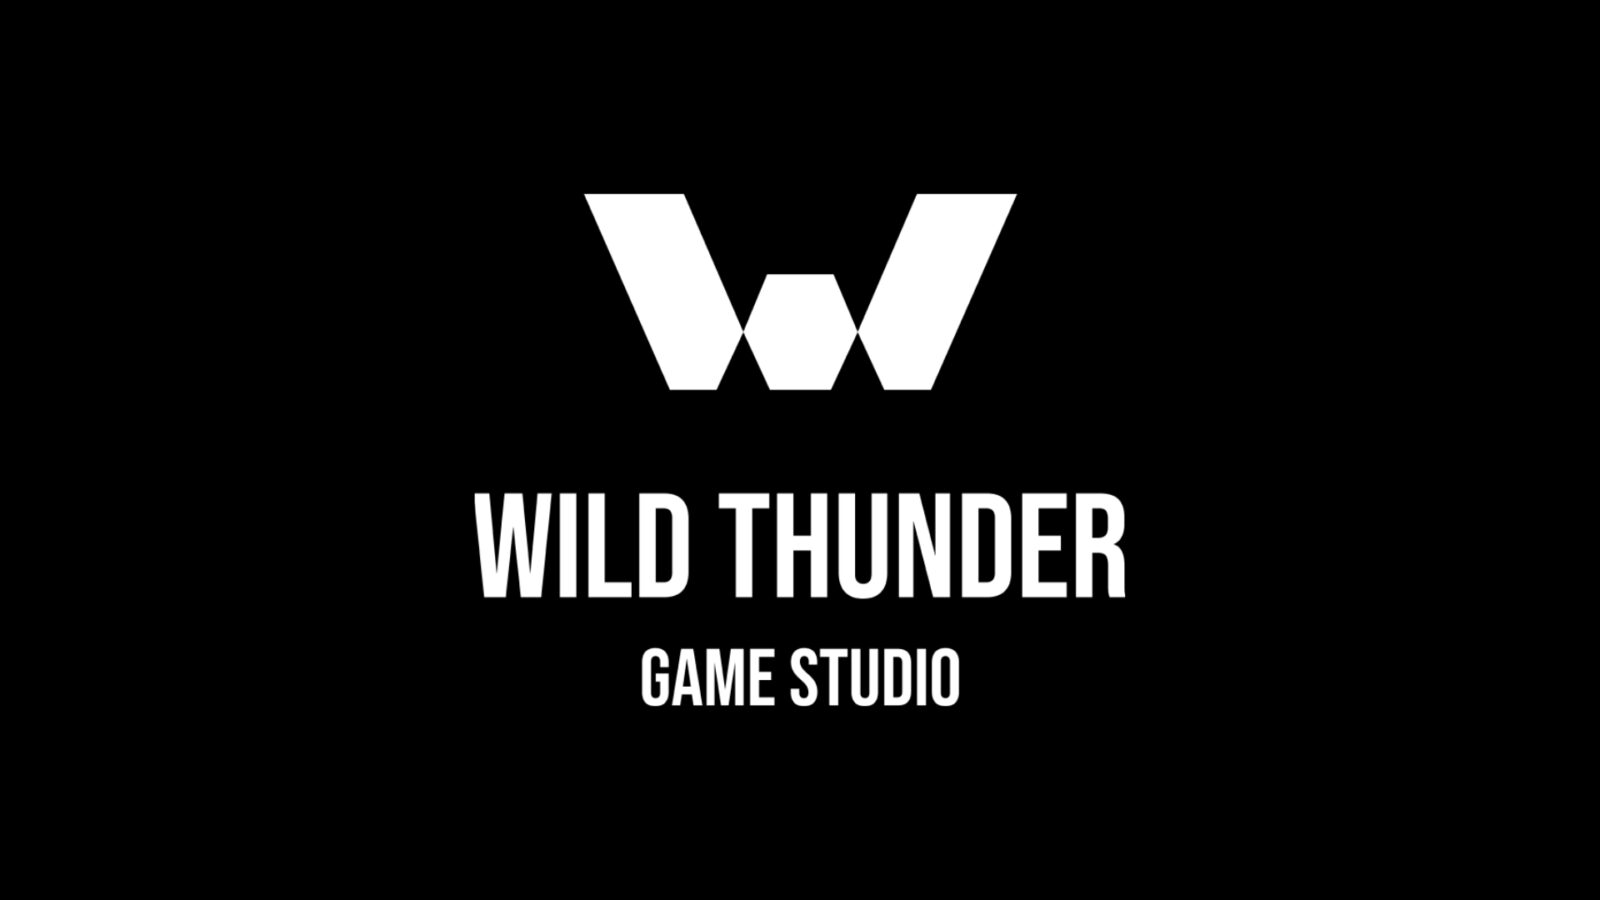 Wild Thunder, a Vietnamese blockchain gaming studio, has reportedly acquired the rights, IP, and property of three new blockchain-based projects from a Dubai-based investment company called DIG international.